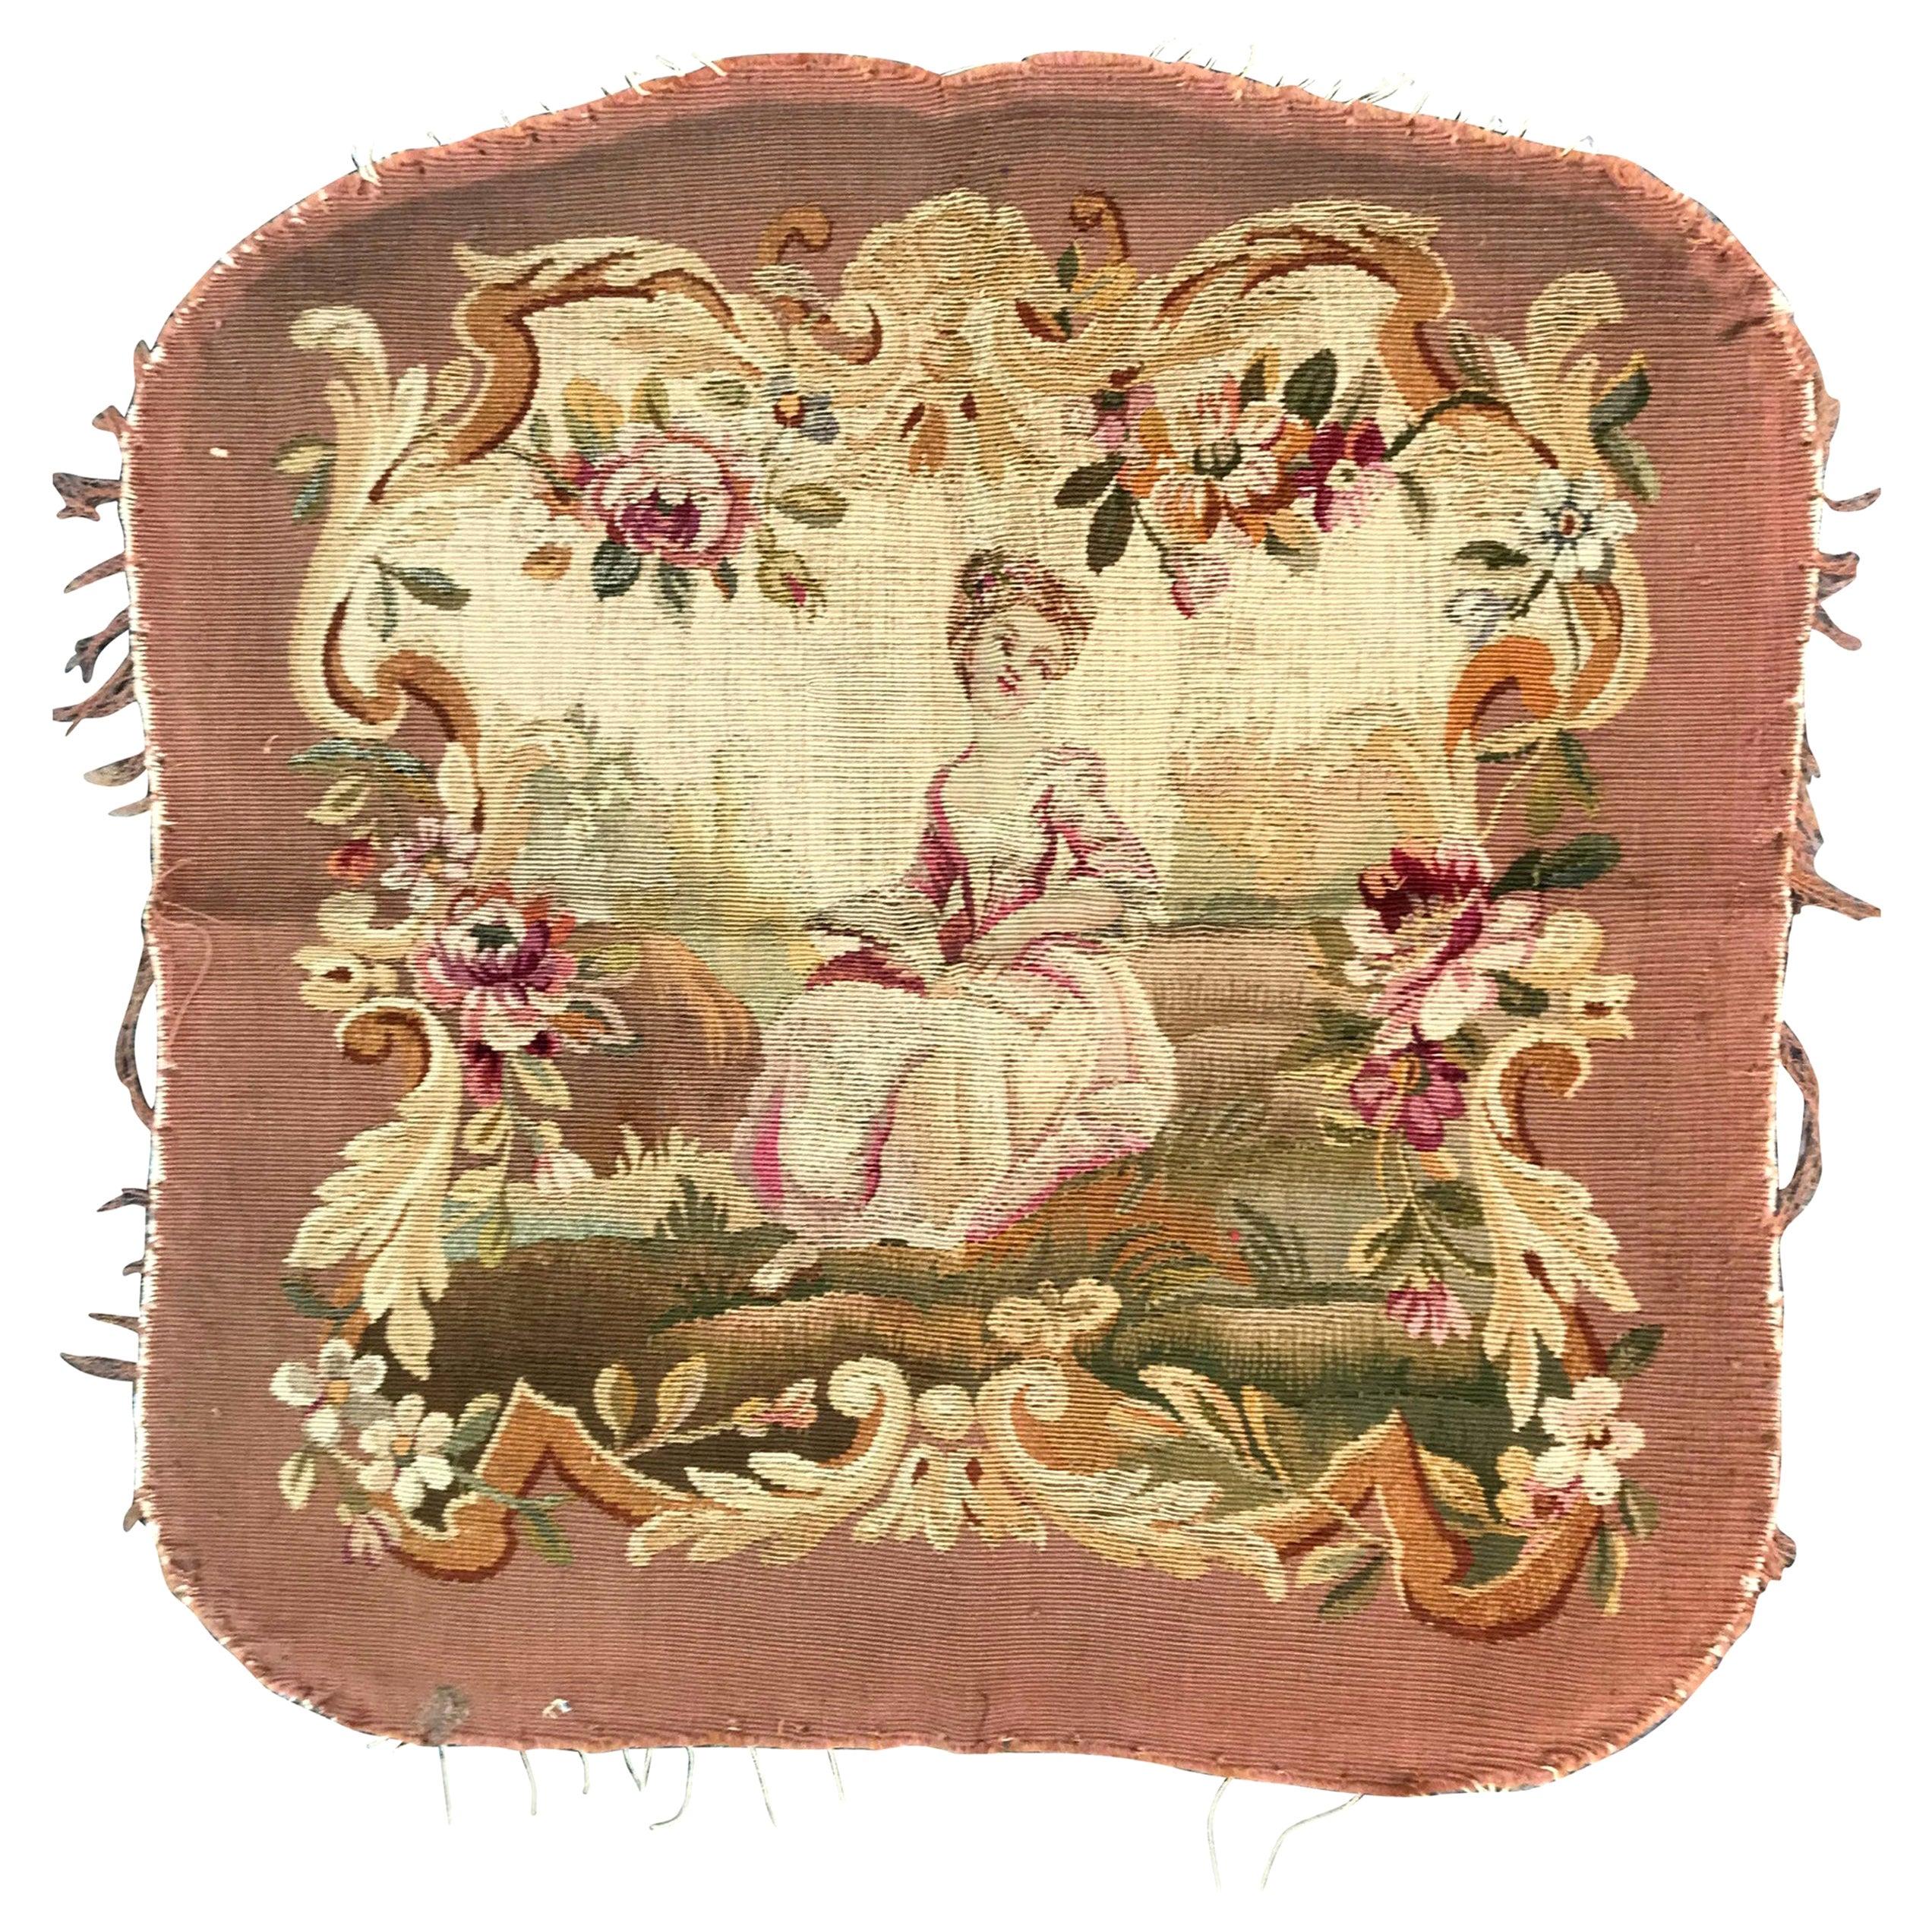 Bobyrug’s Antique Aubusson Cushion Chair Cover Tapestry